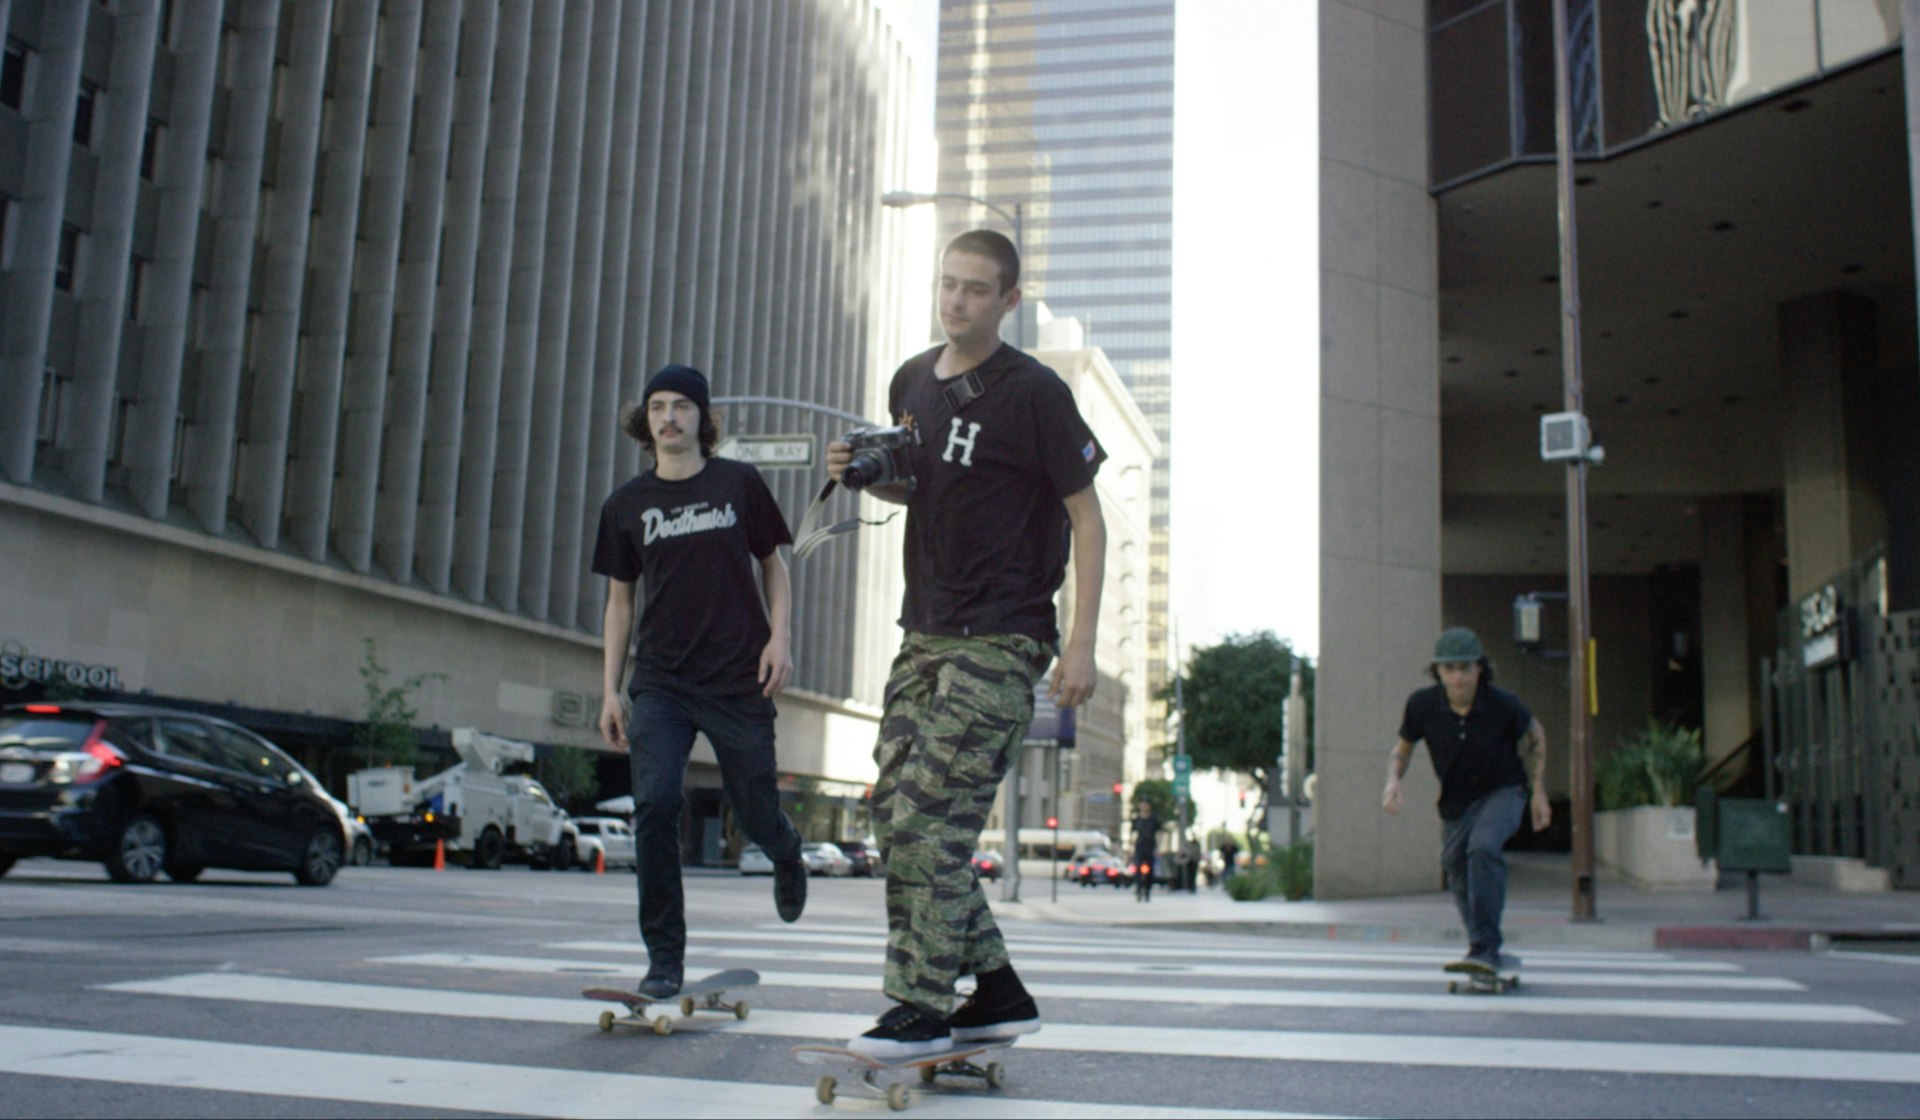 Video: Los Angeles skate culture through the eyes of photographer Jacob Messex